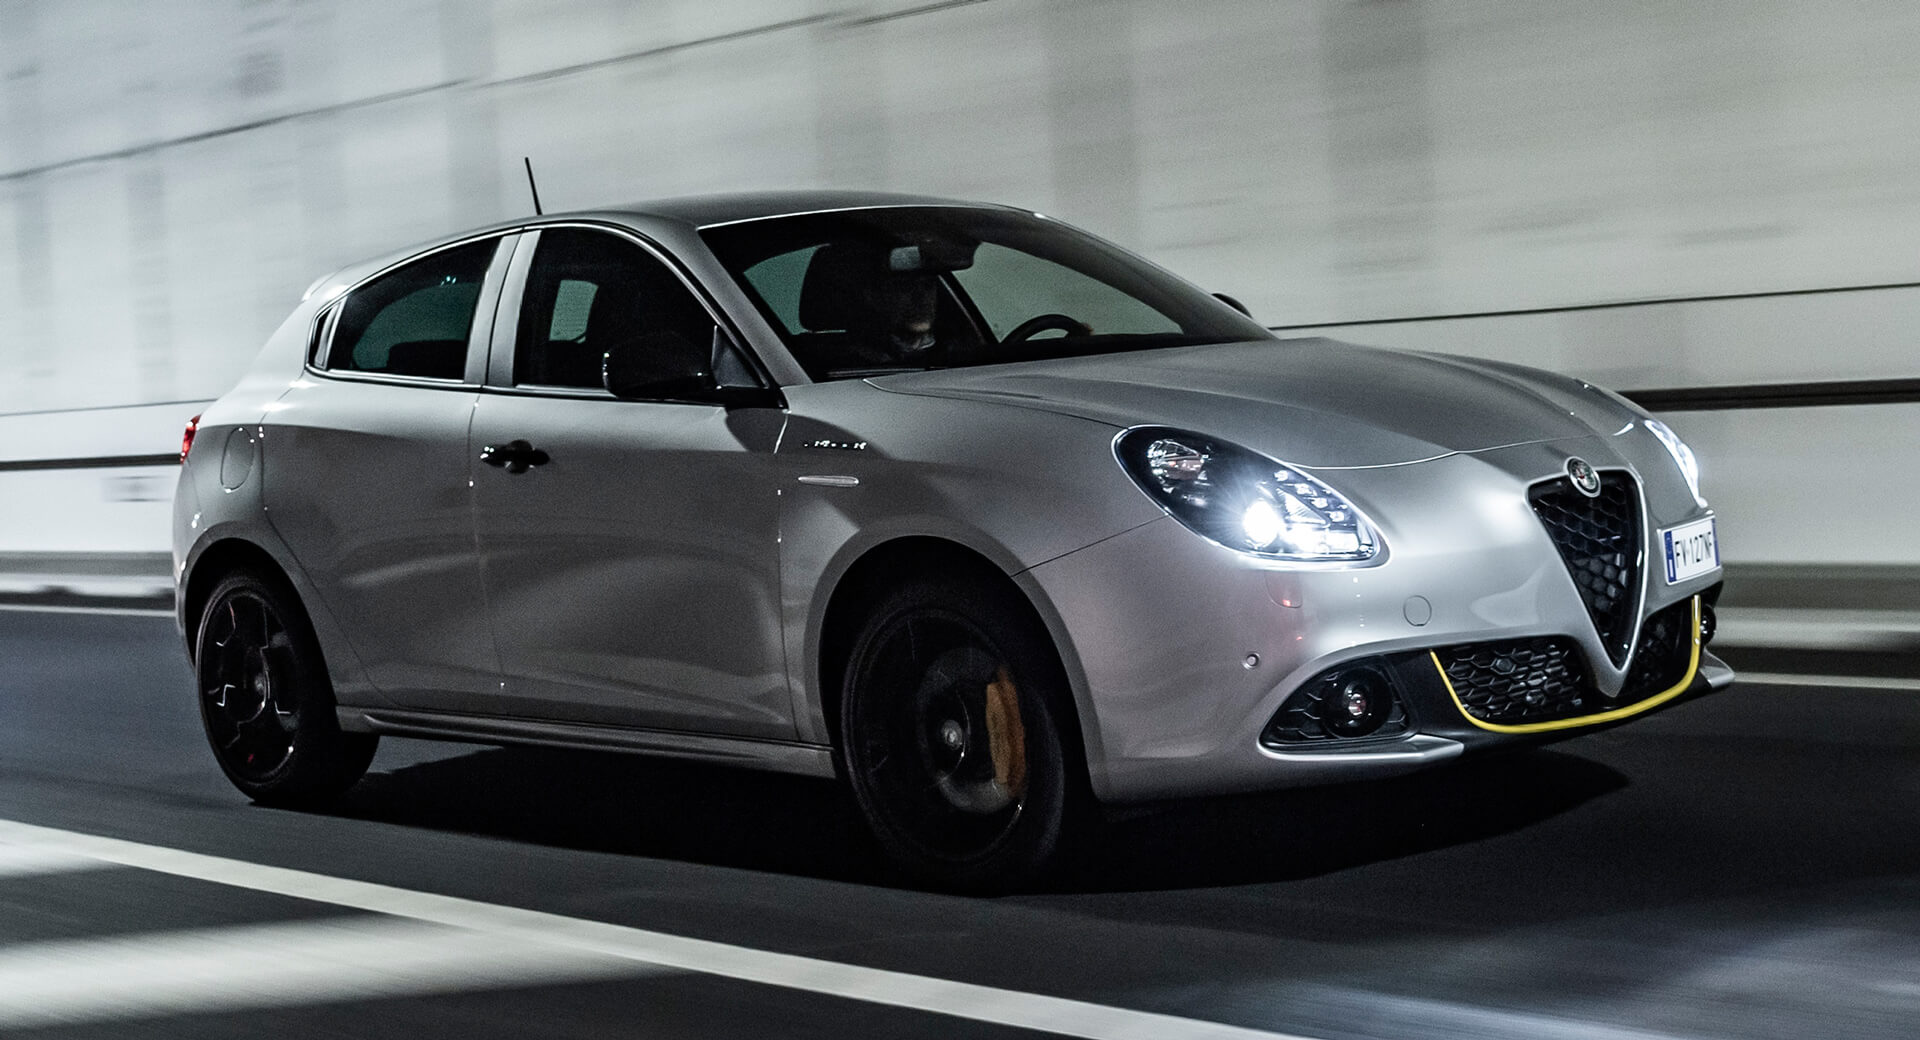 Alfa Romeo Giulietta To Bite The Dust By Year's End, Replaced By Tonale SUV